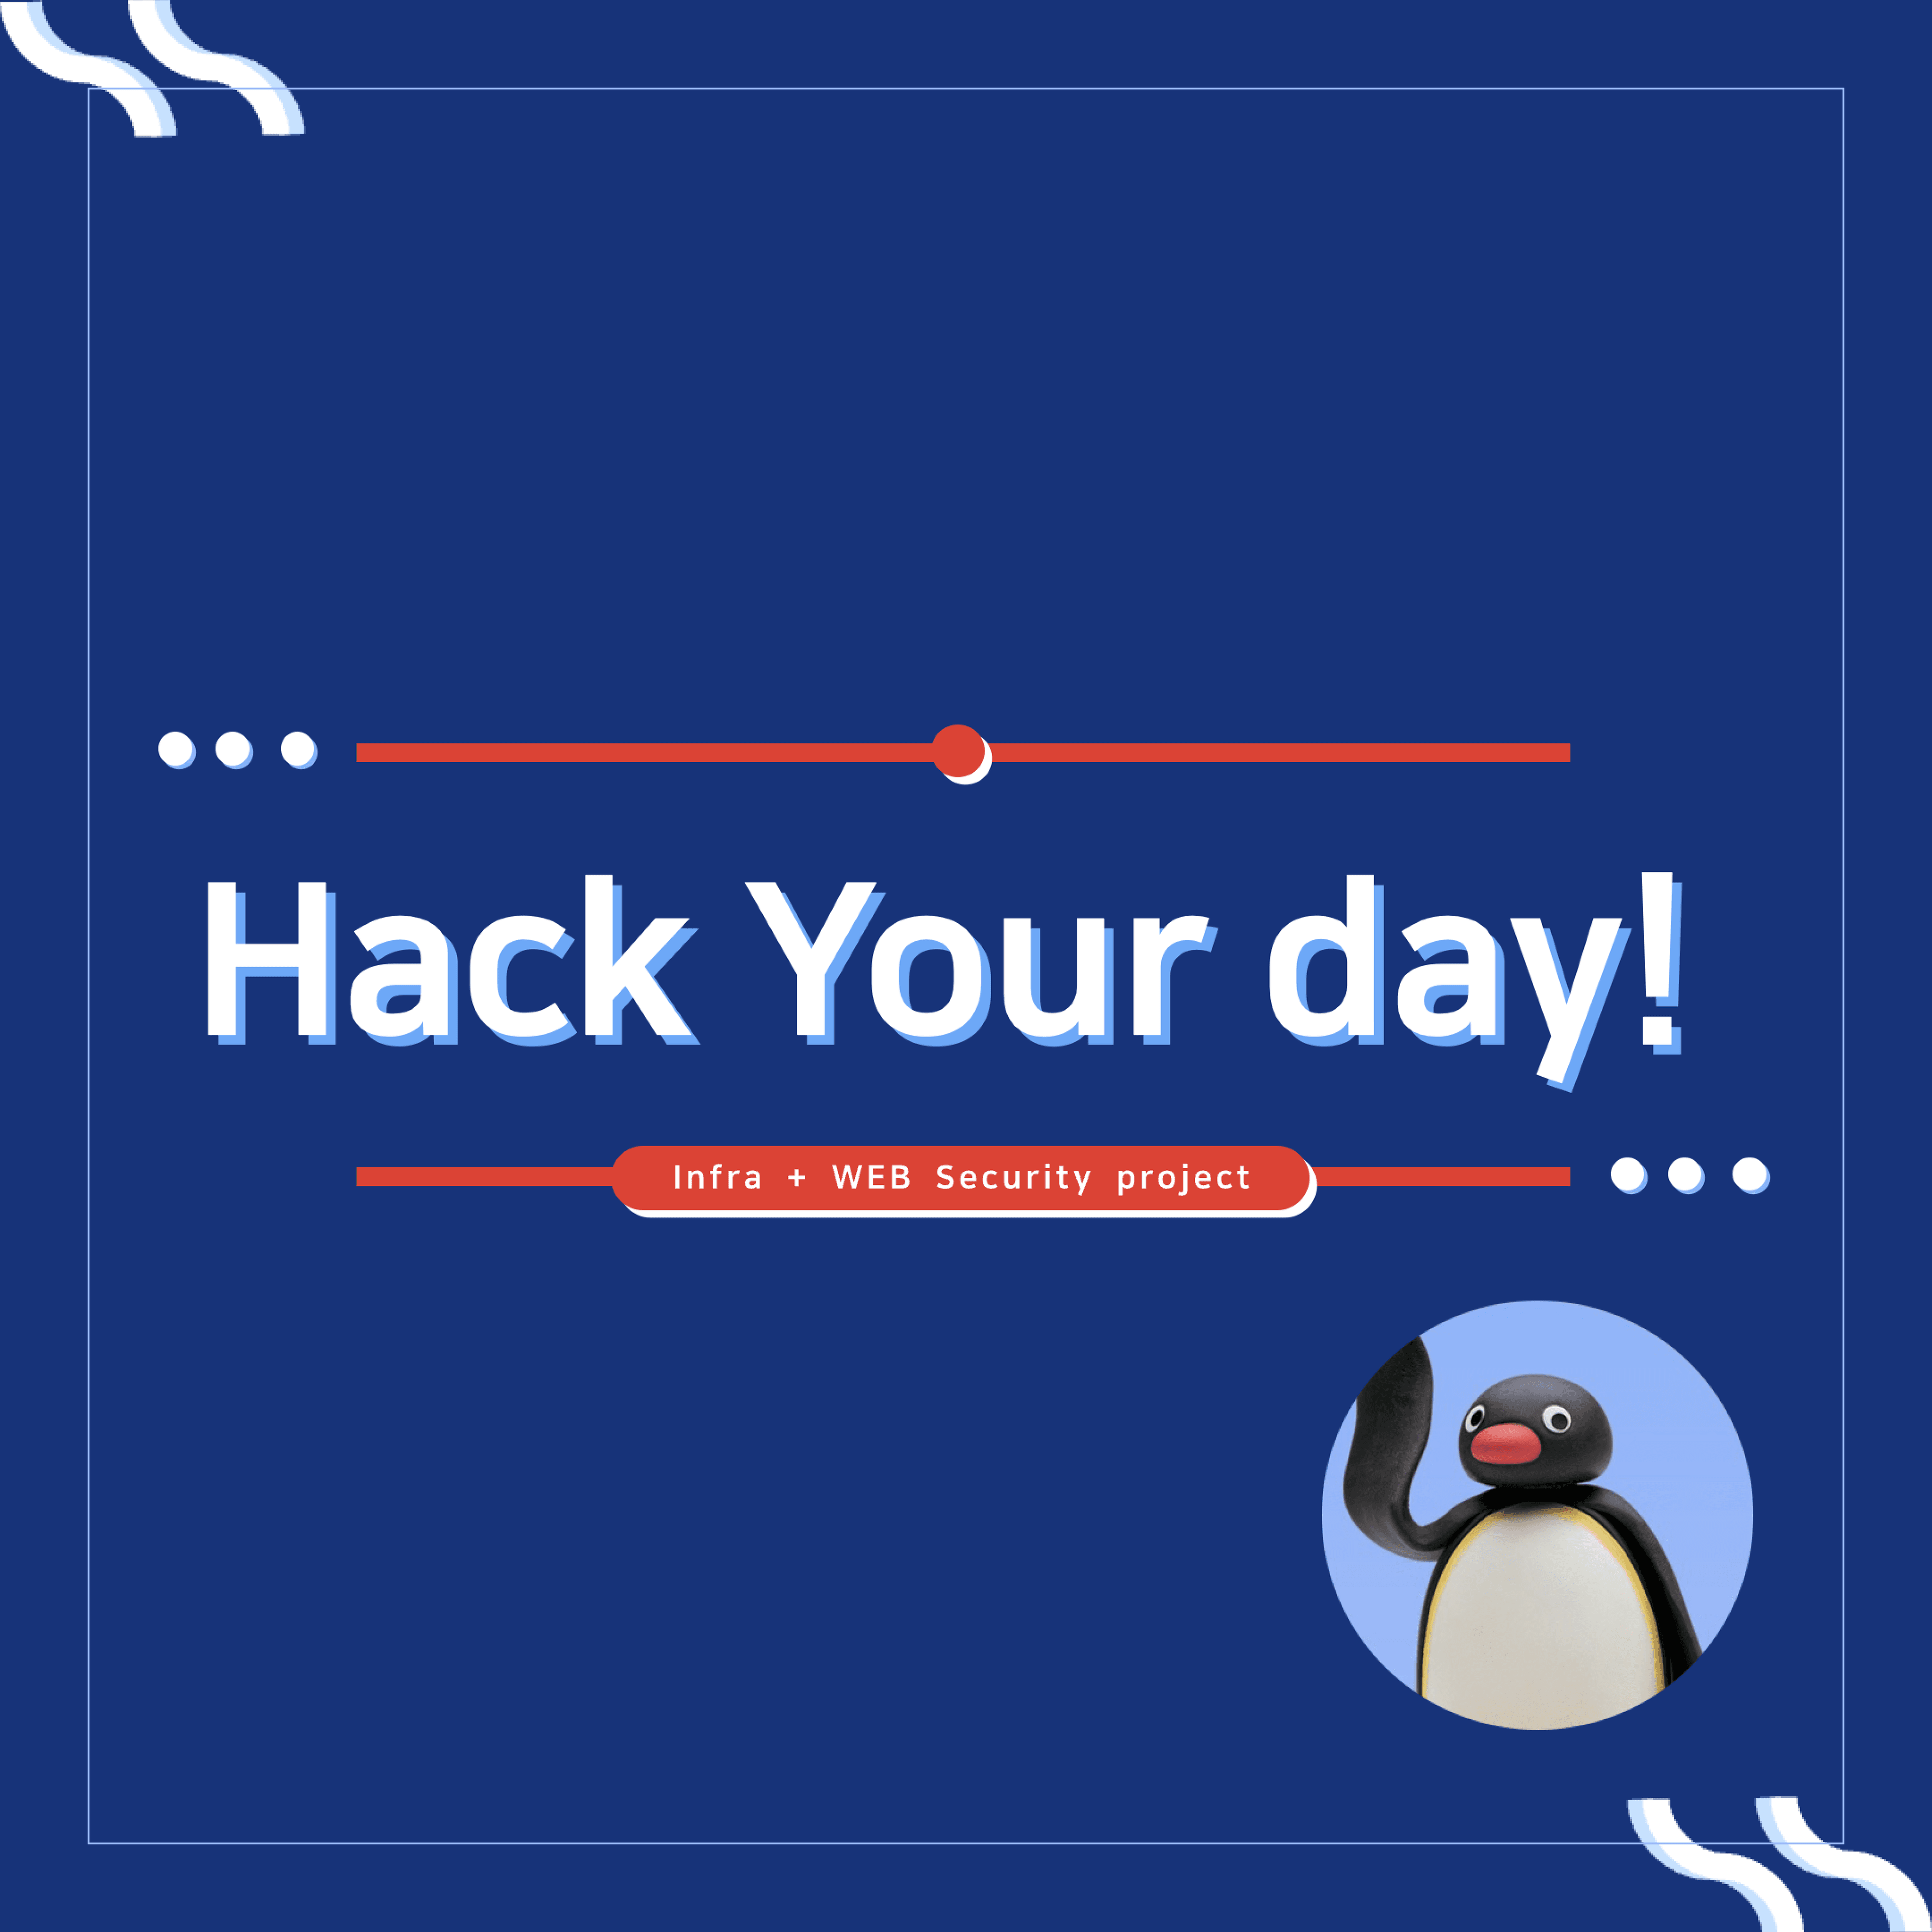 Hack Your day!